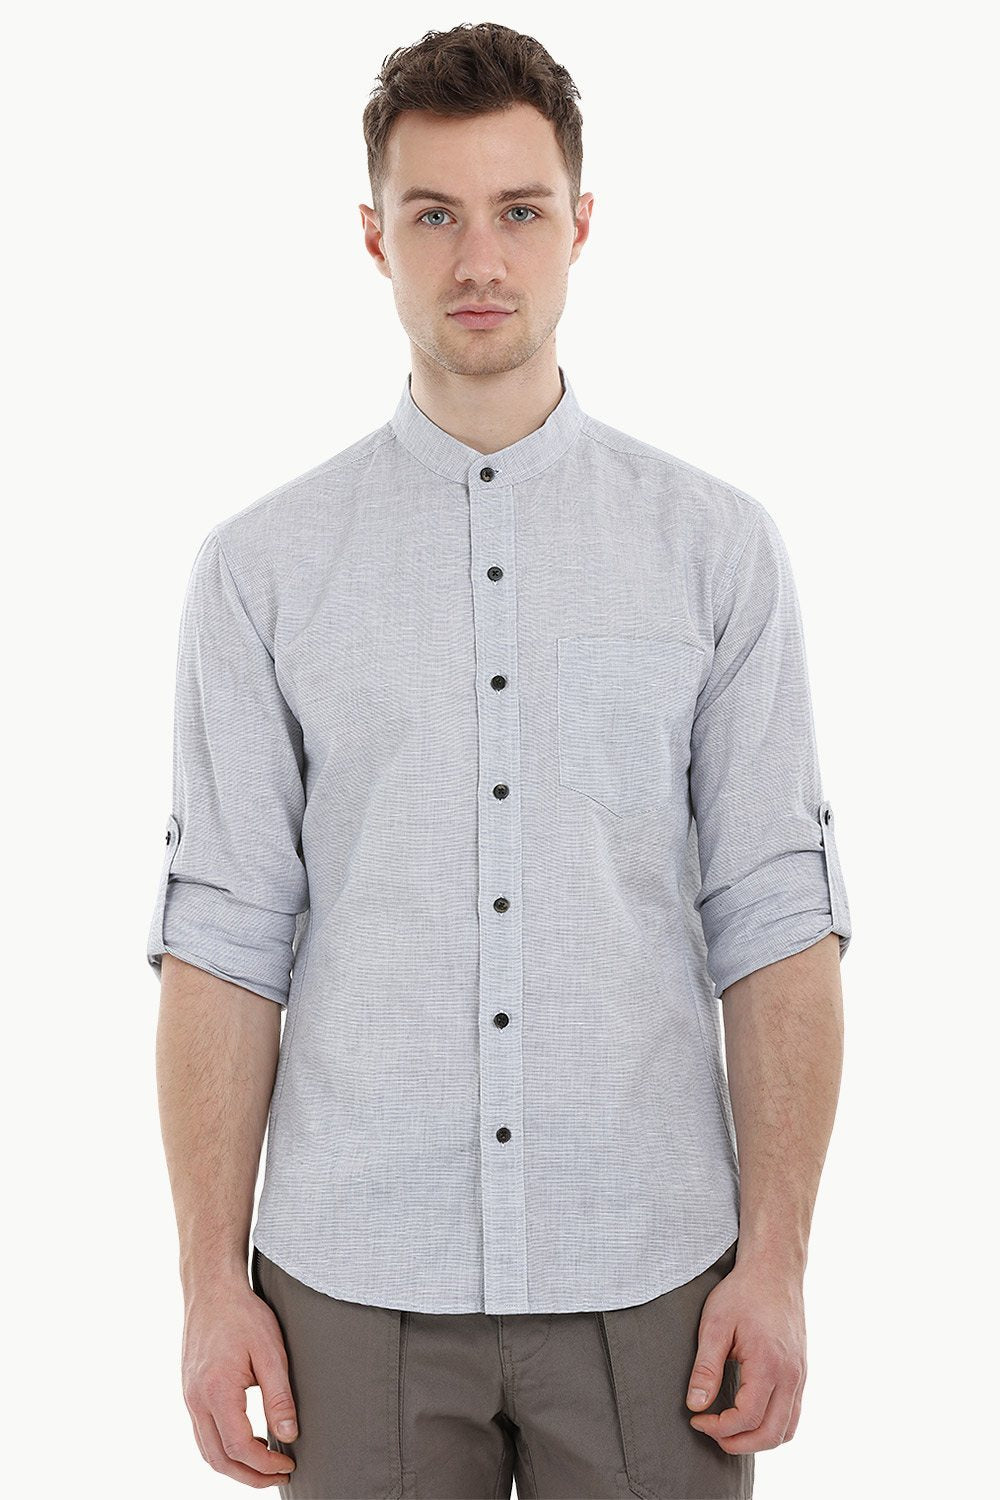 Chinese Collar Shirt Online - Buy Online Men's Chinese Collared Shirts ...